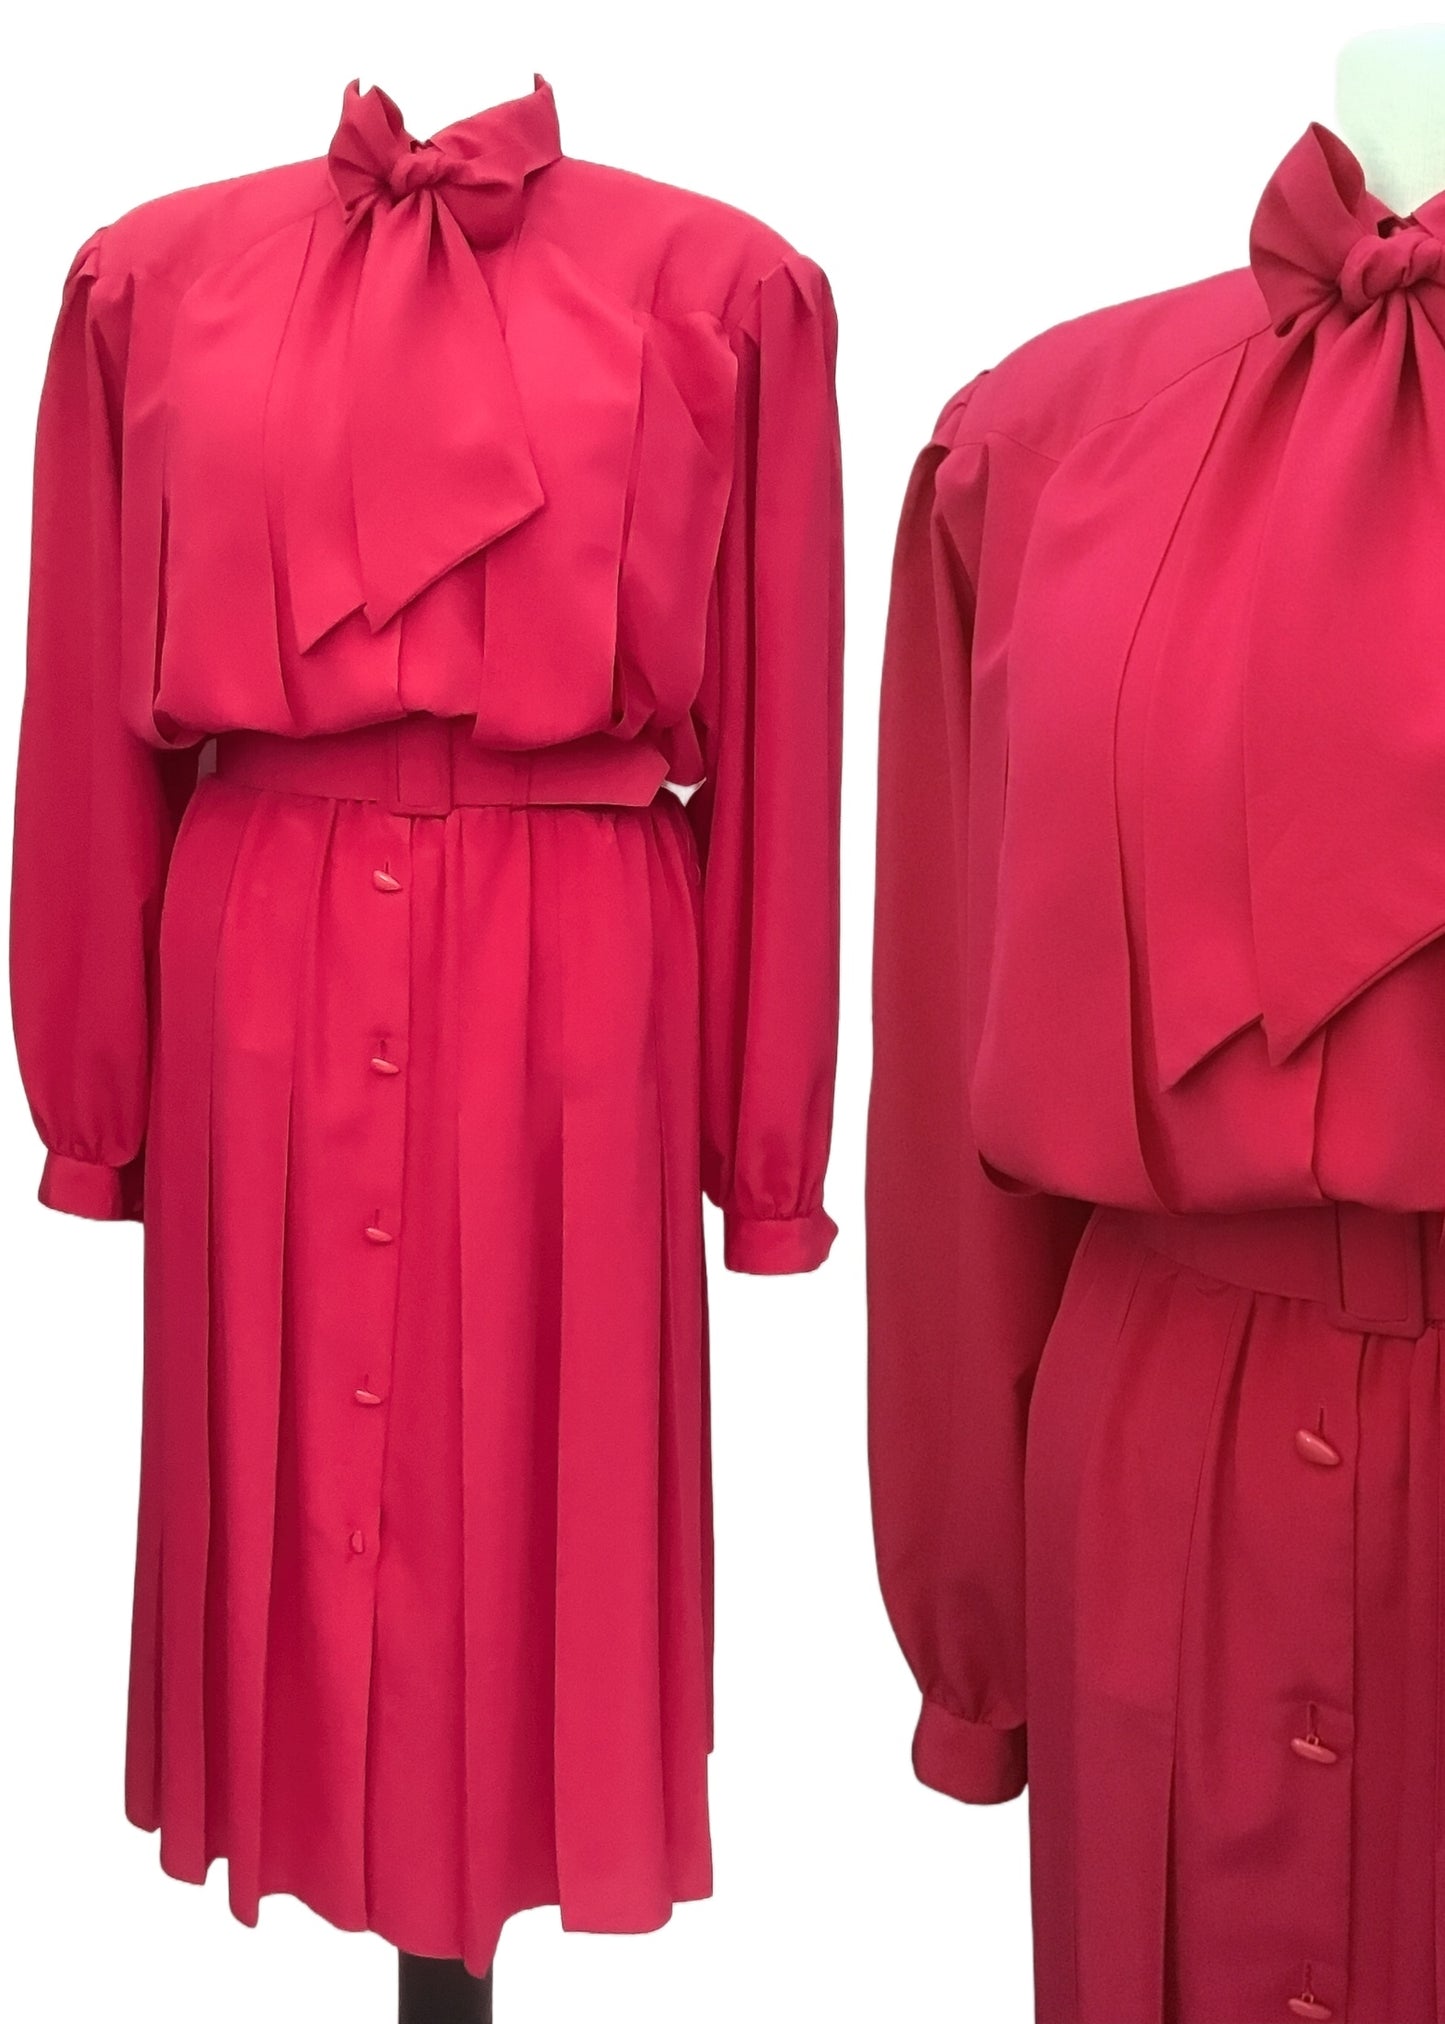 Vintage 80s Hot pink cerise secretary dress, with long sleeve neck tie and pleats, button down for size 16